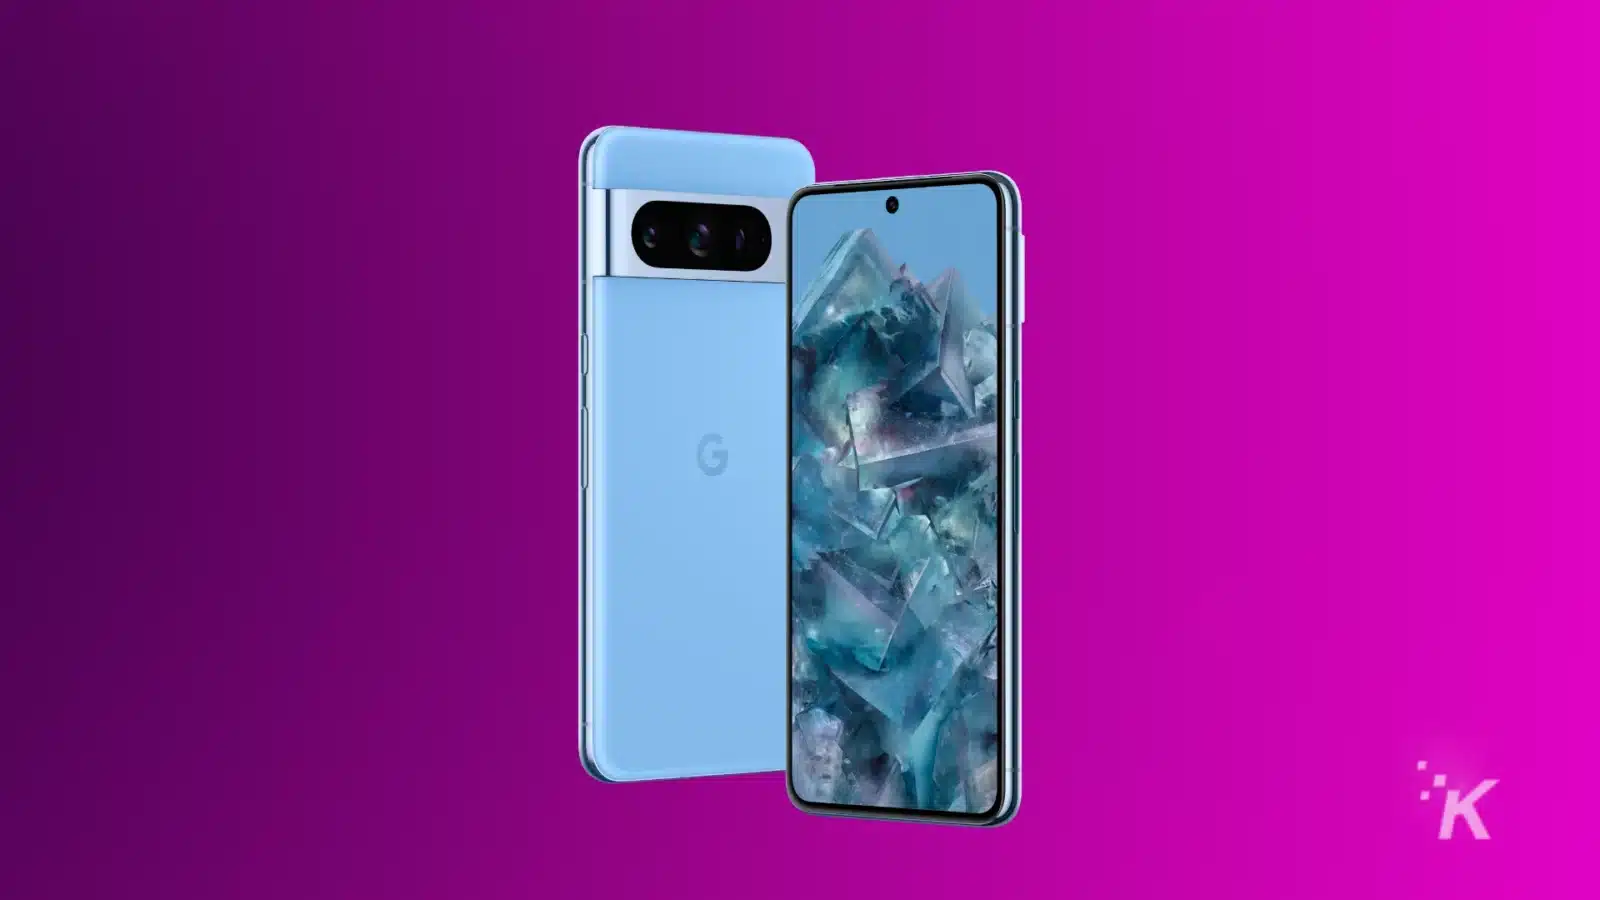 Pixel 8 pro in blue color, on a purple background